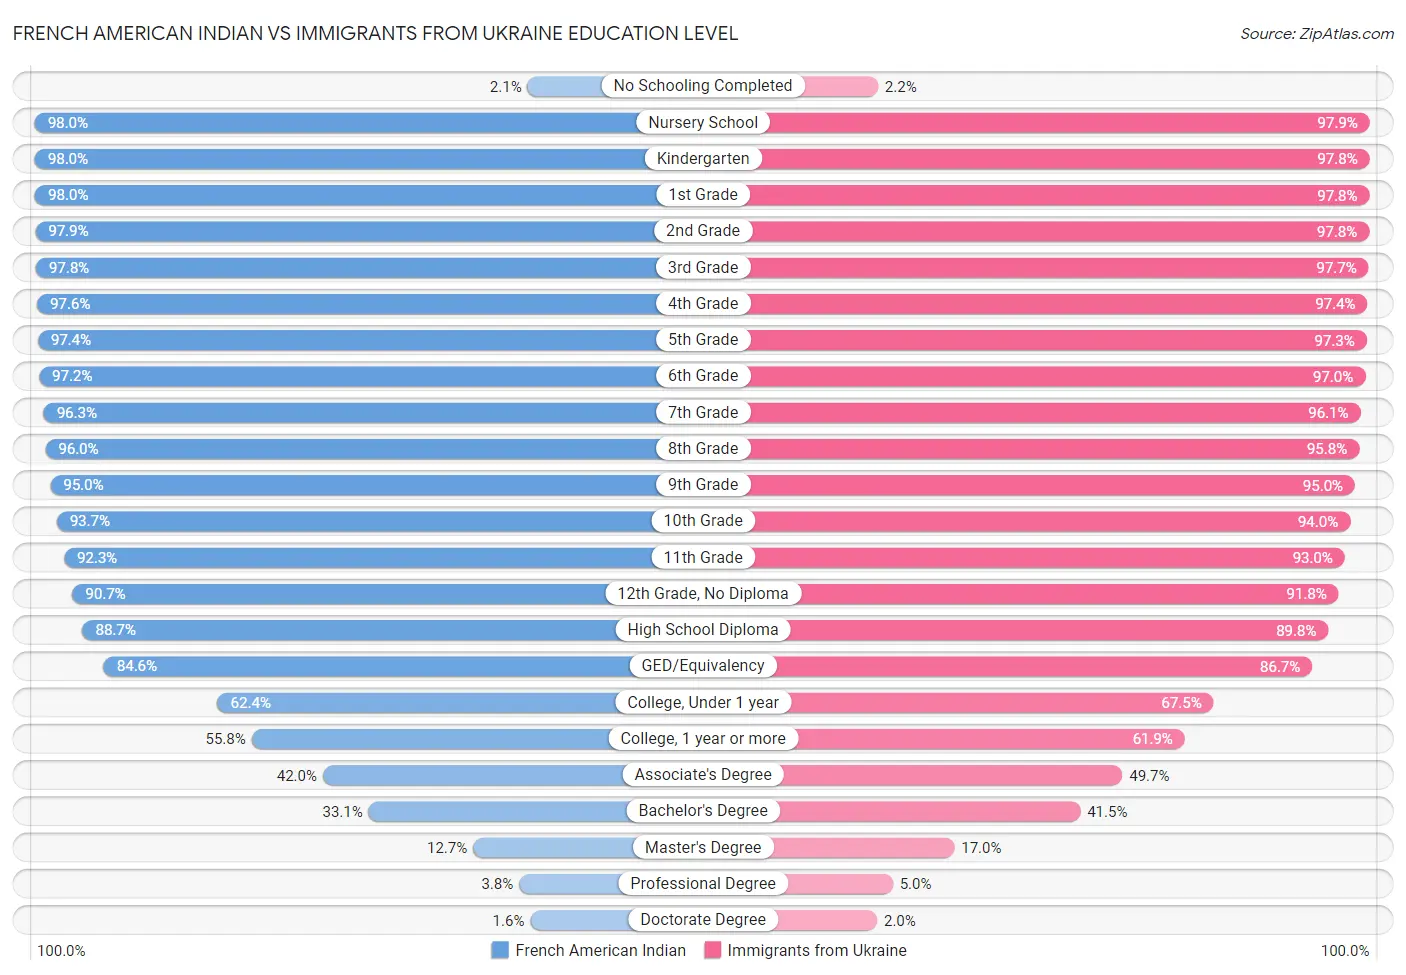 French American Indian vs Immigrants from Ukraine Education Level